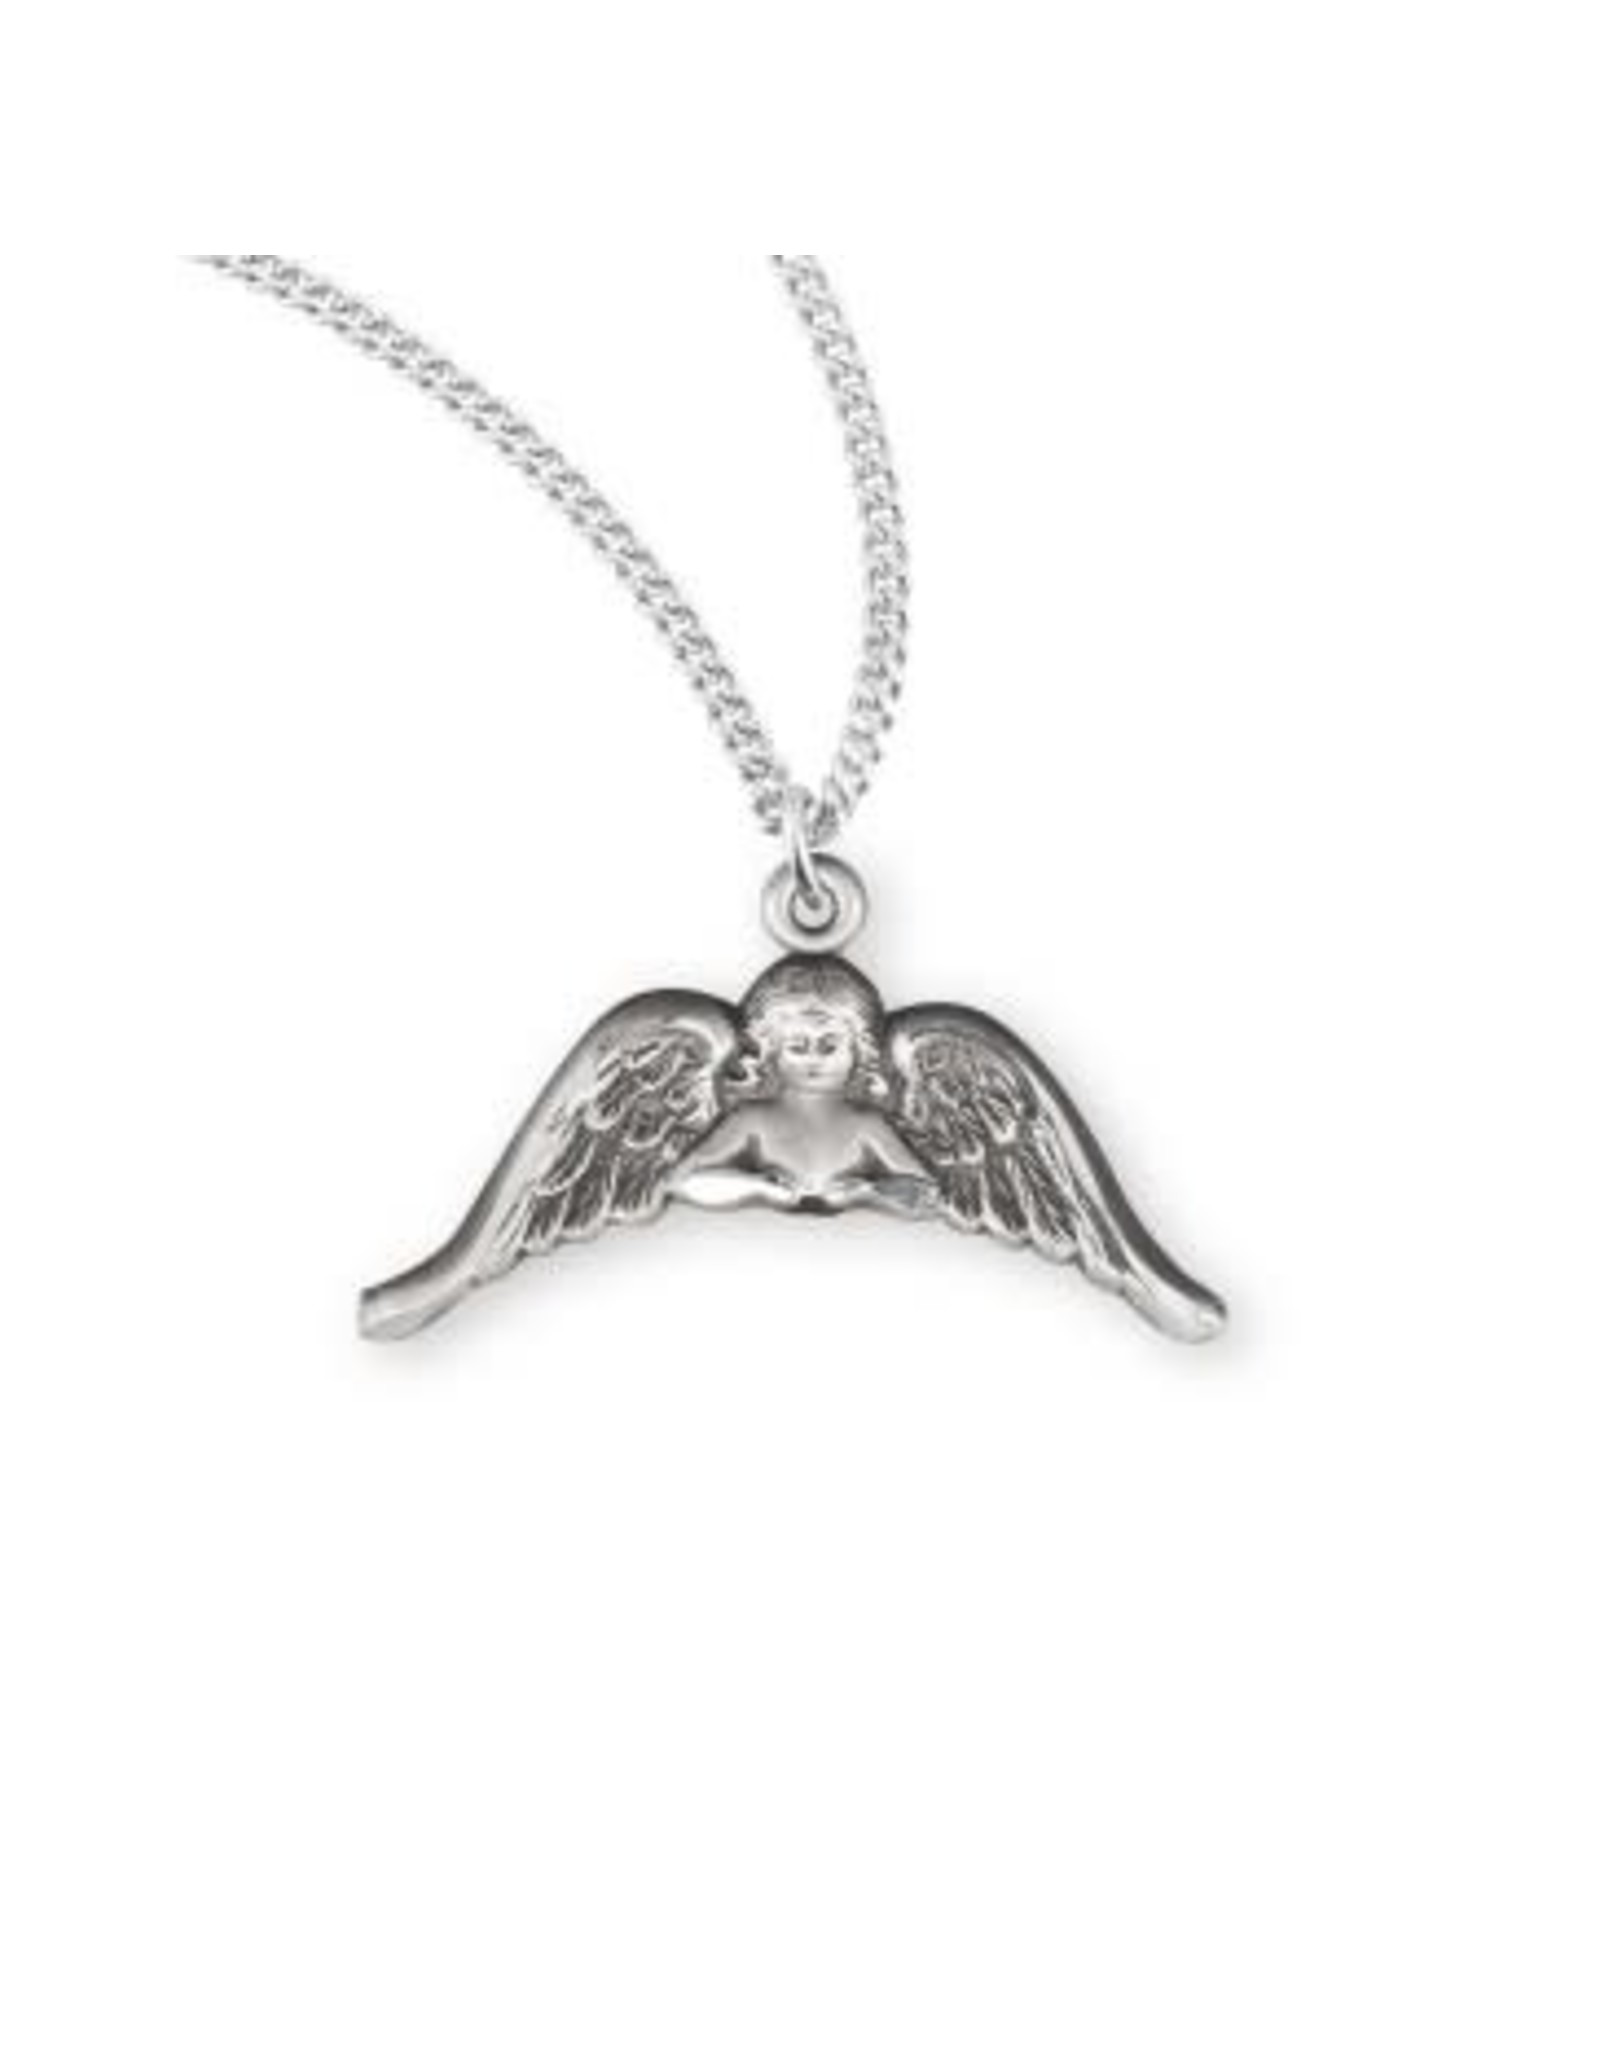 HMH Guardian Angel with Wings Medal - Sterling Silver on 18" Chain